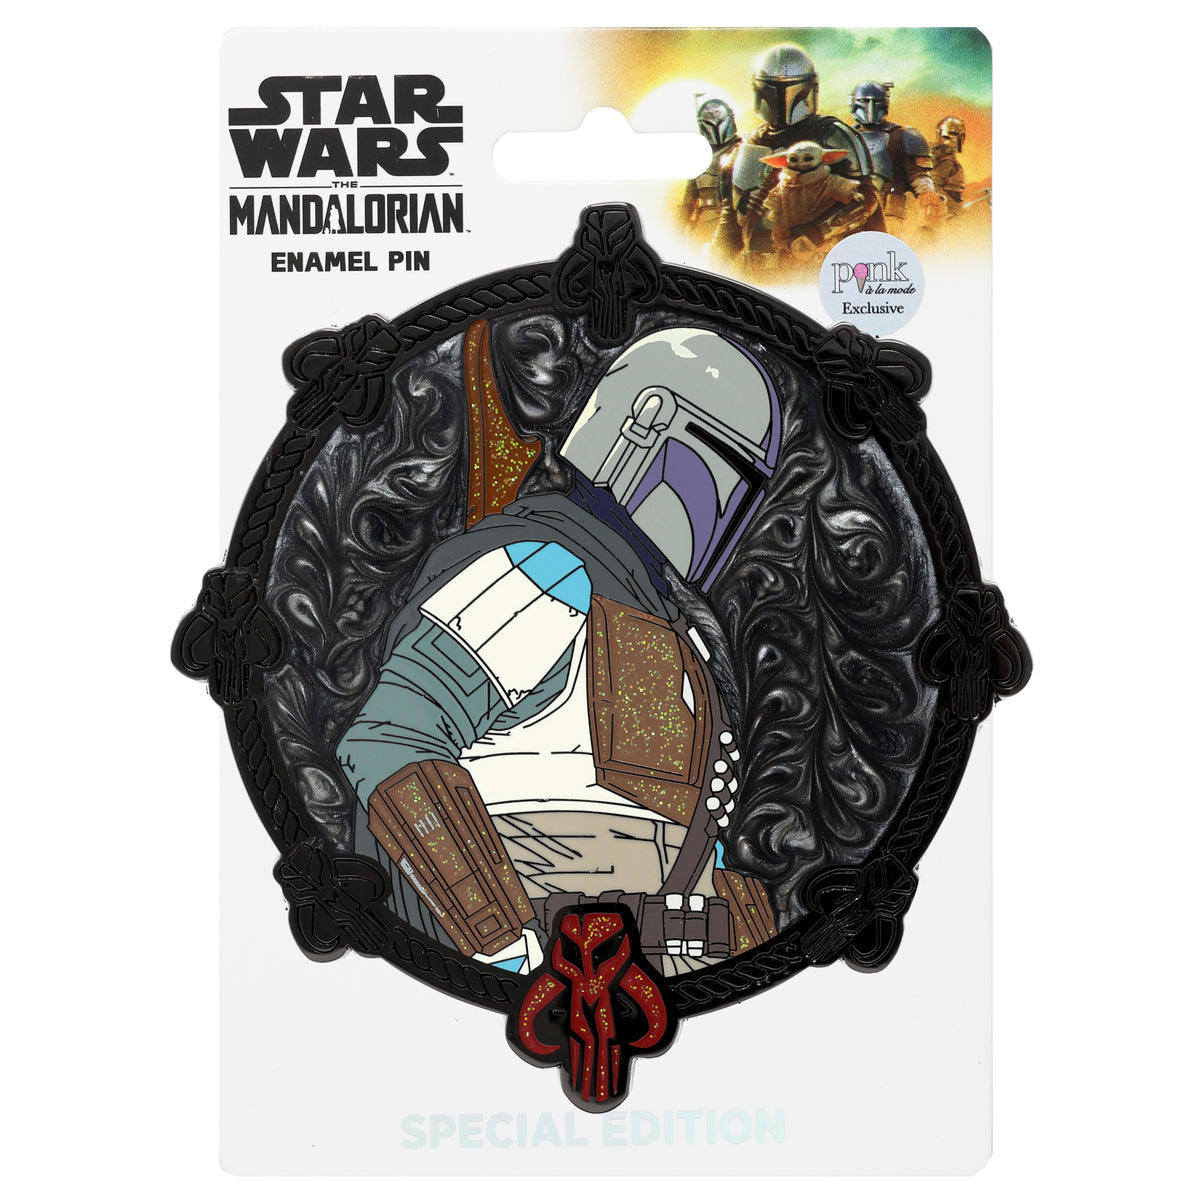 Star Wars Iconic Series Special Edition 300 - NEW RELEASE